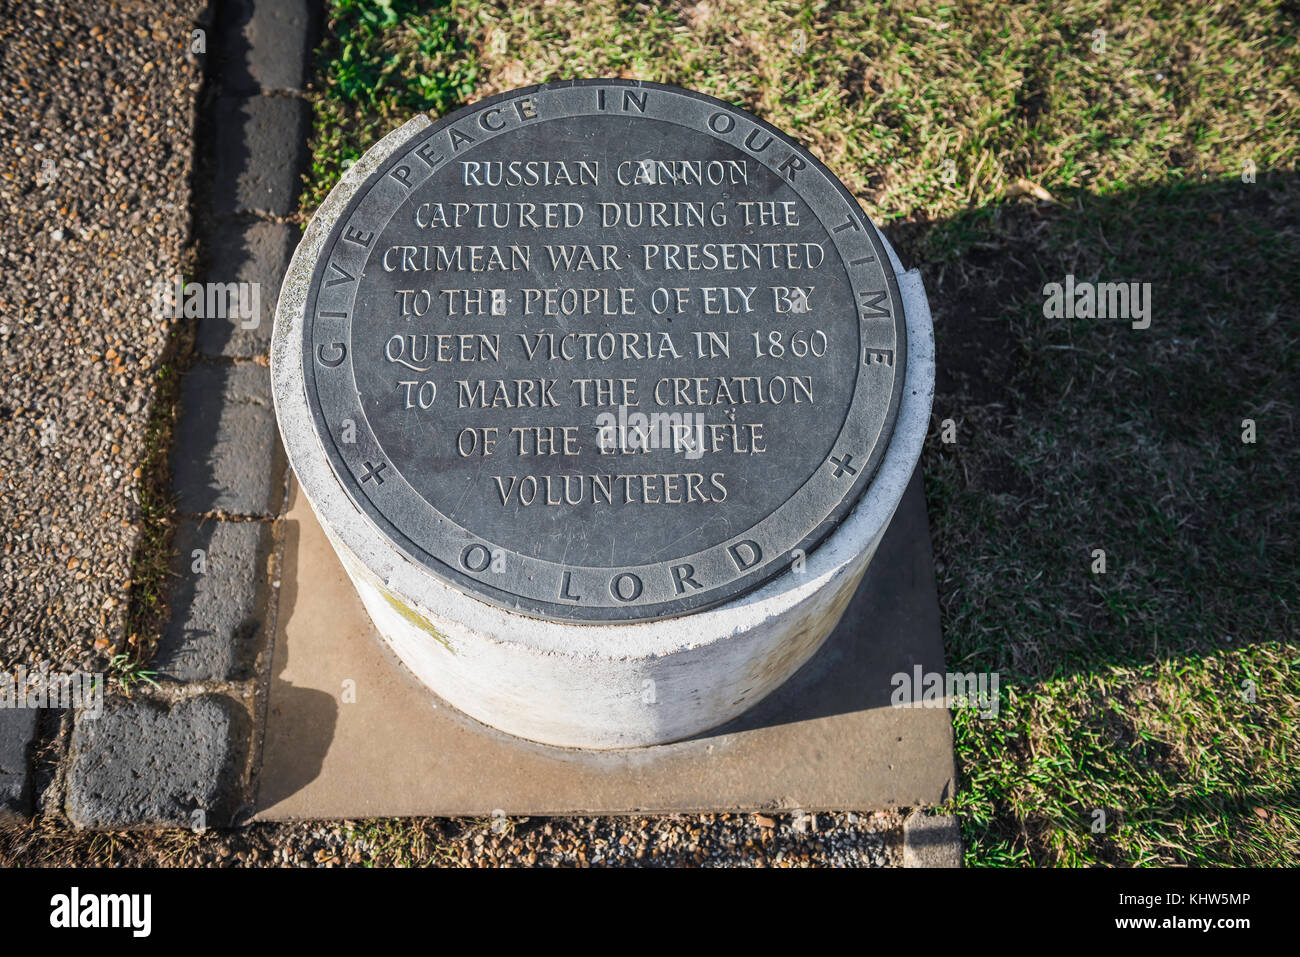 Ely Cannon, plaque inscribed with a dedication beside a captured Russian cannon from the Crimean War in the Cathedral Green, Ely, Cambridgeshire, UK. Stock Photo